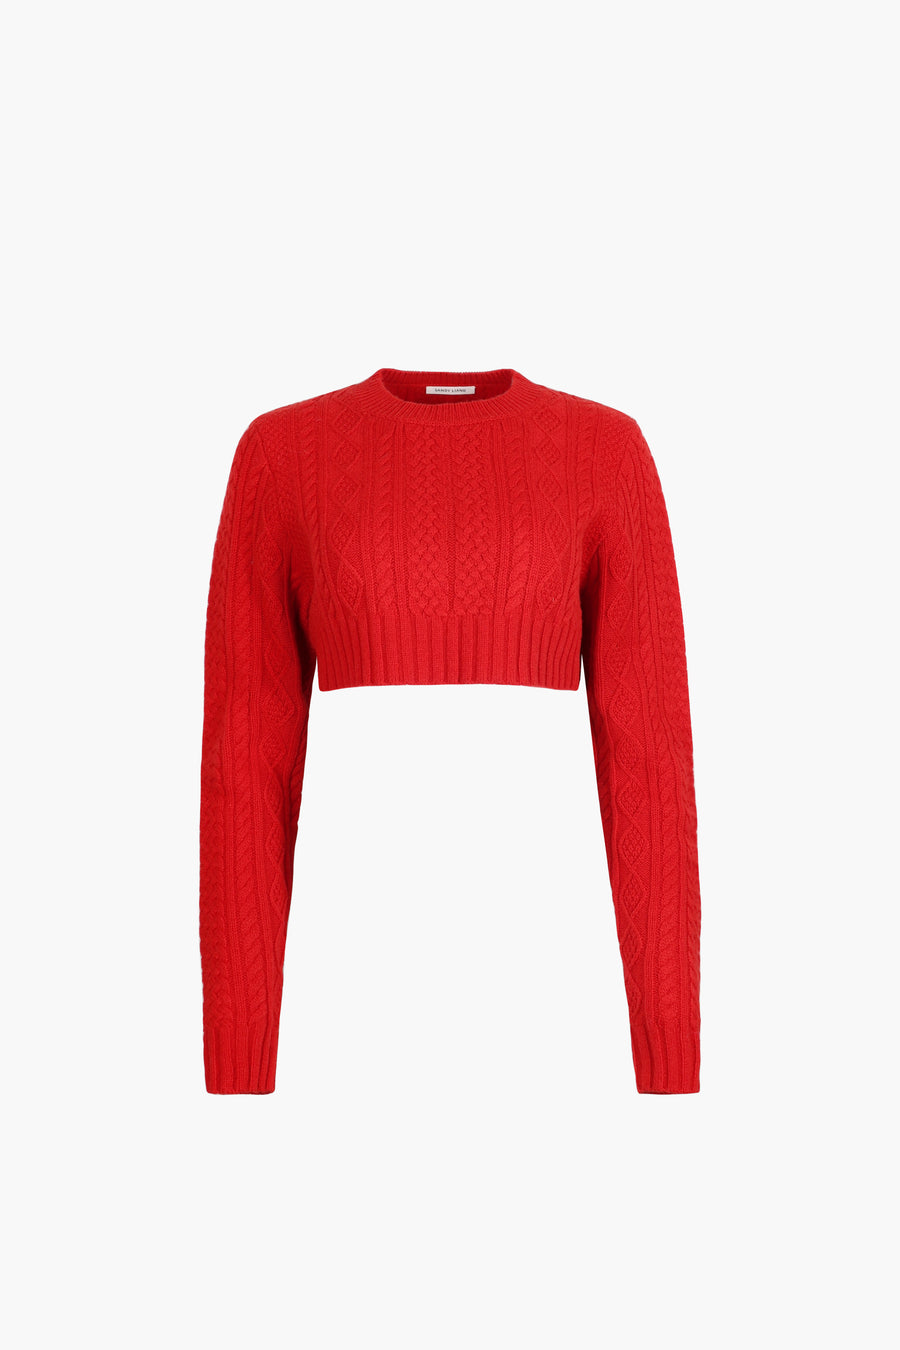 Cropped cable knit sweater in red